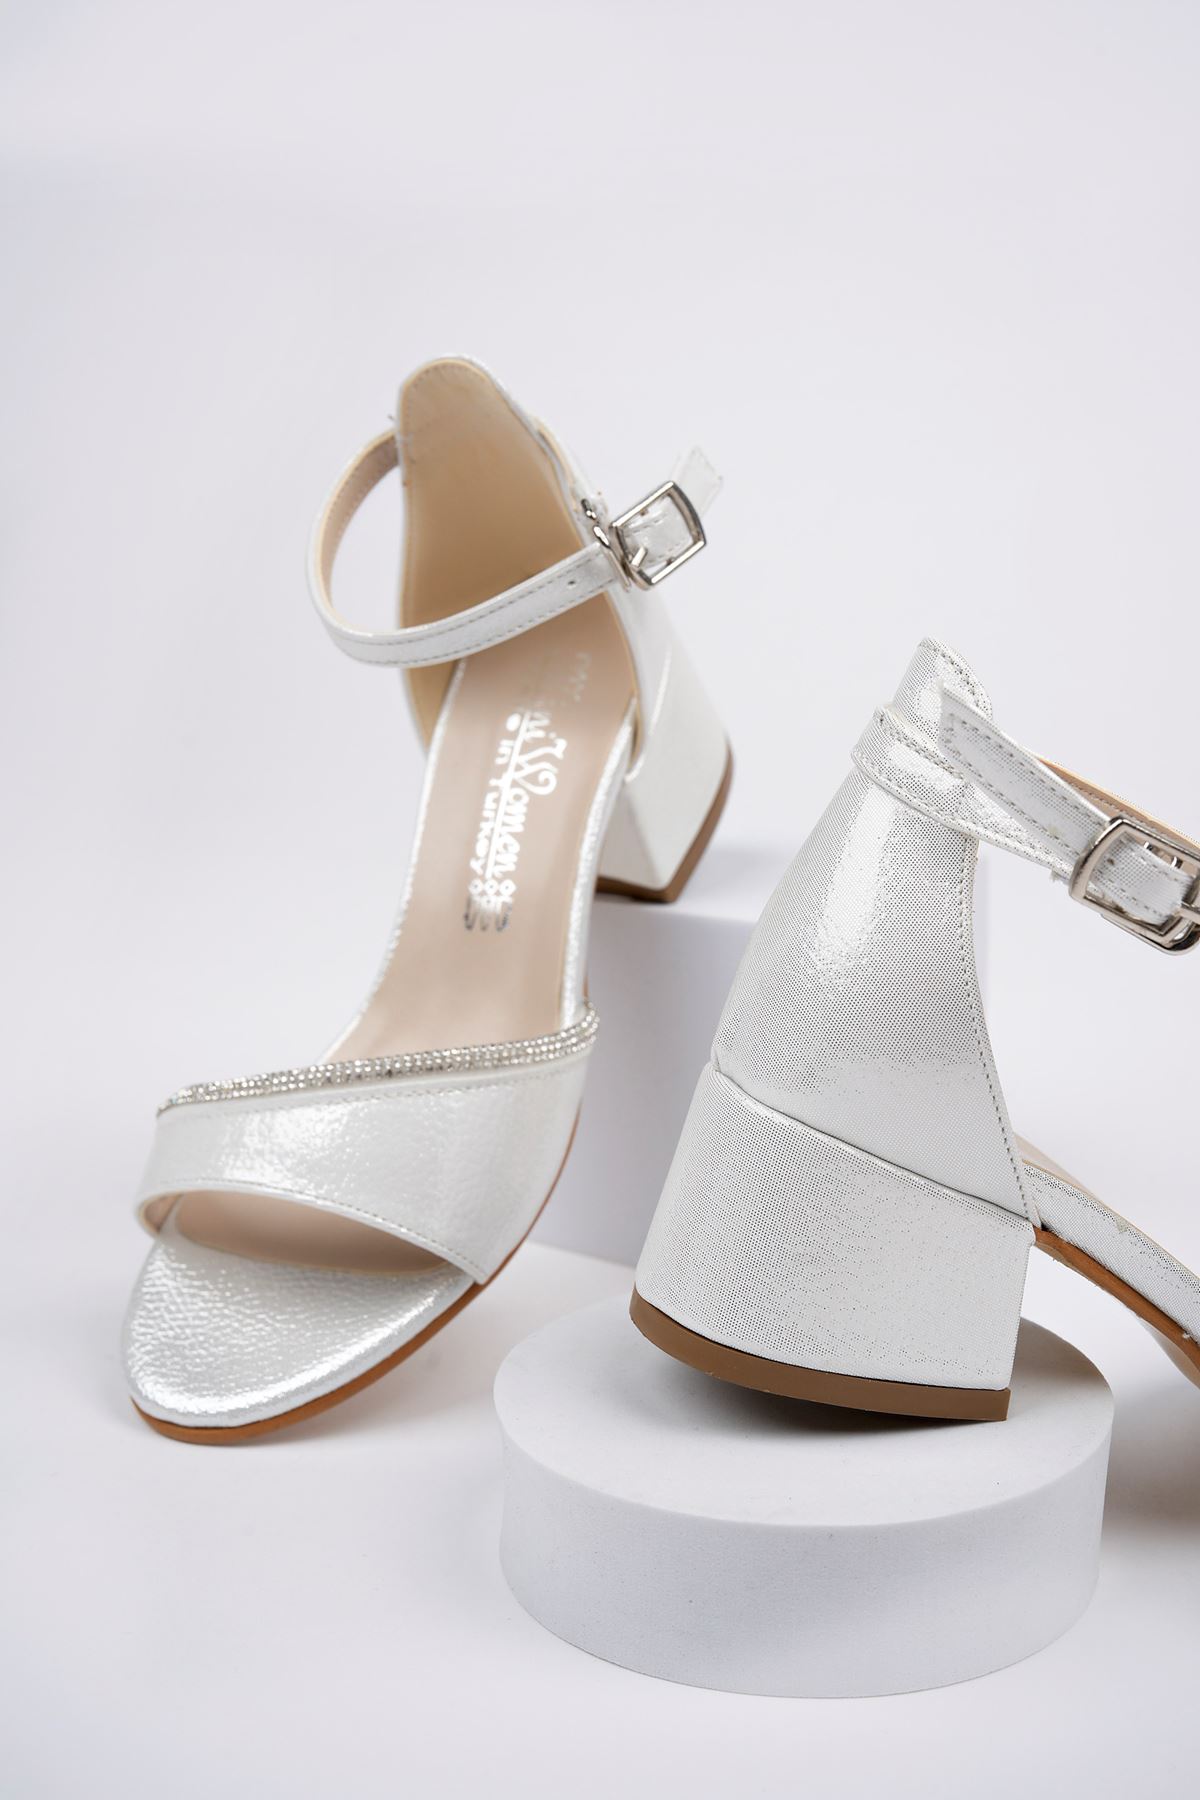 Heeled Mother of Pearl Stone Sandals for Girls